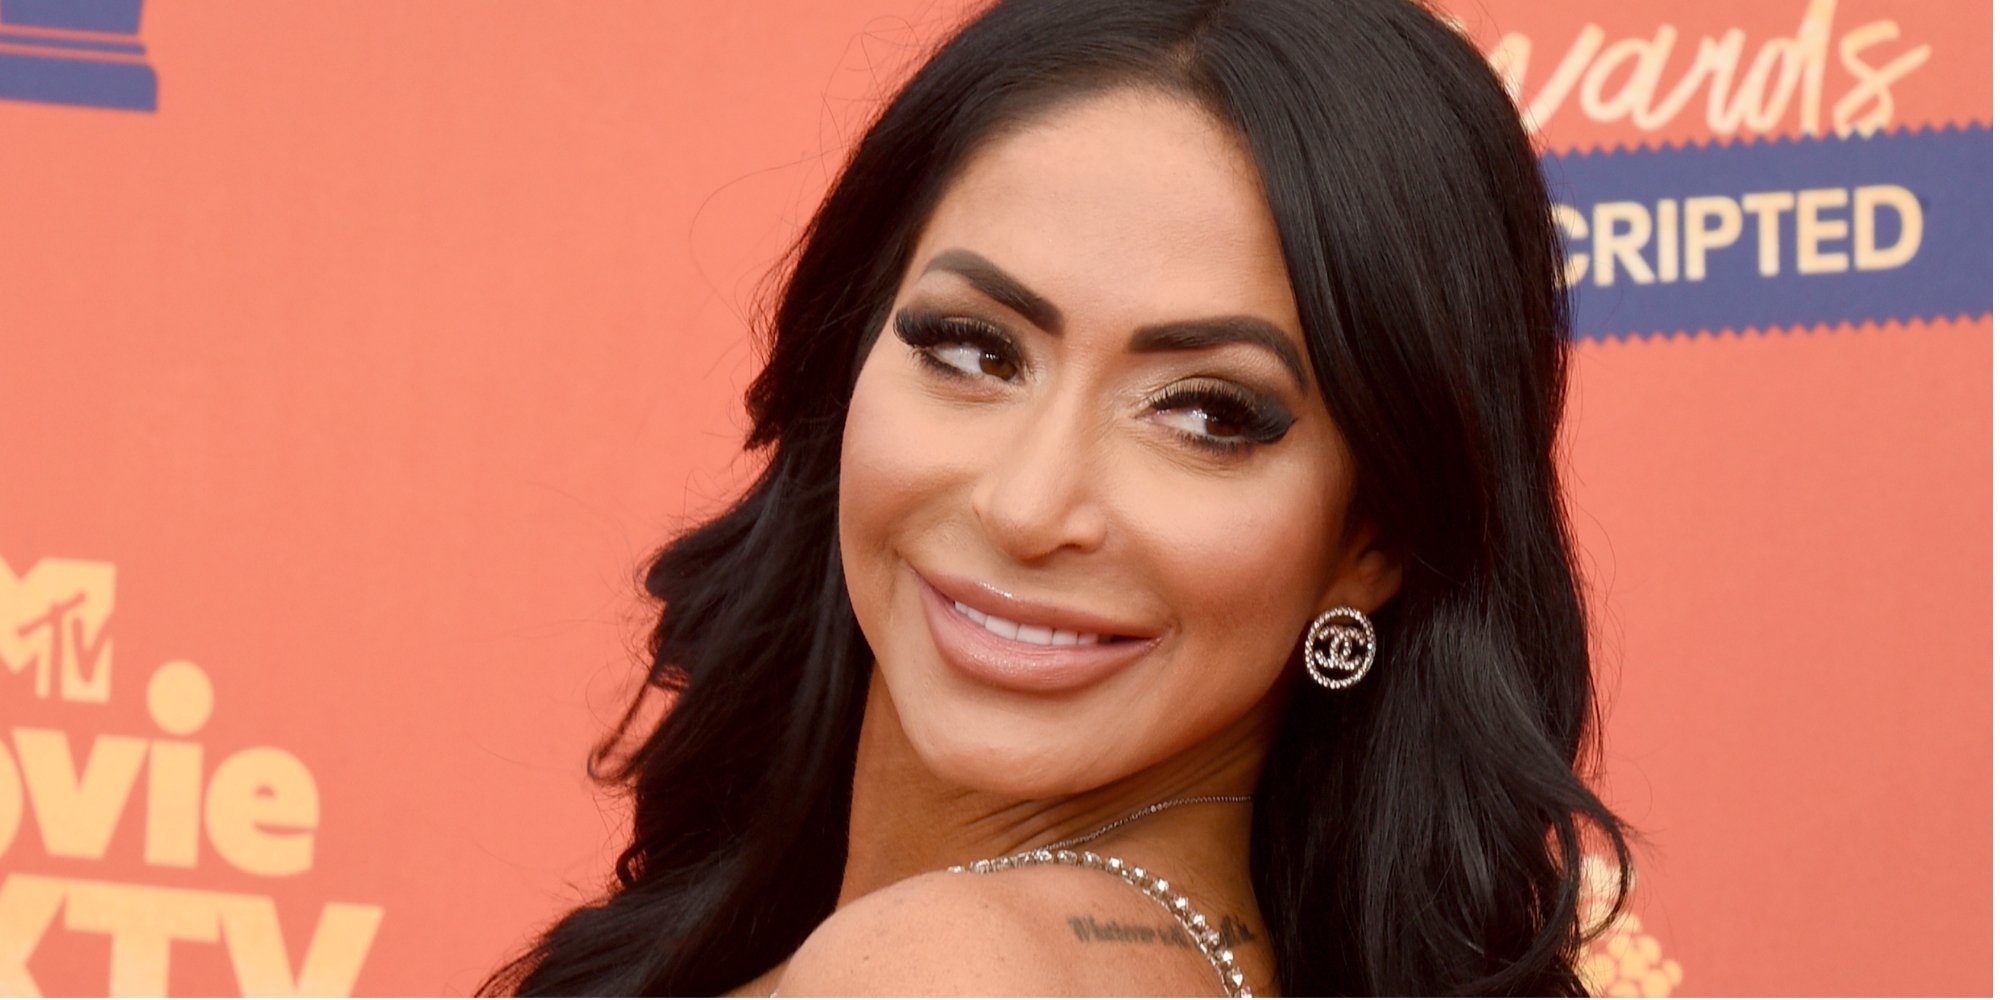 ‘Jersey Shore: Family Vacation’ Fans React to News Angelina Pivarnick Is the Next Star of ‘Double Shot at Love’